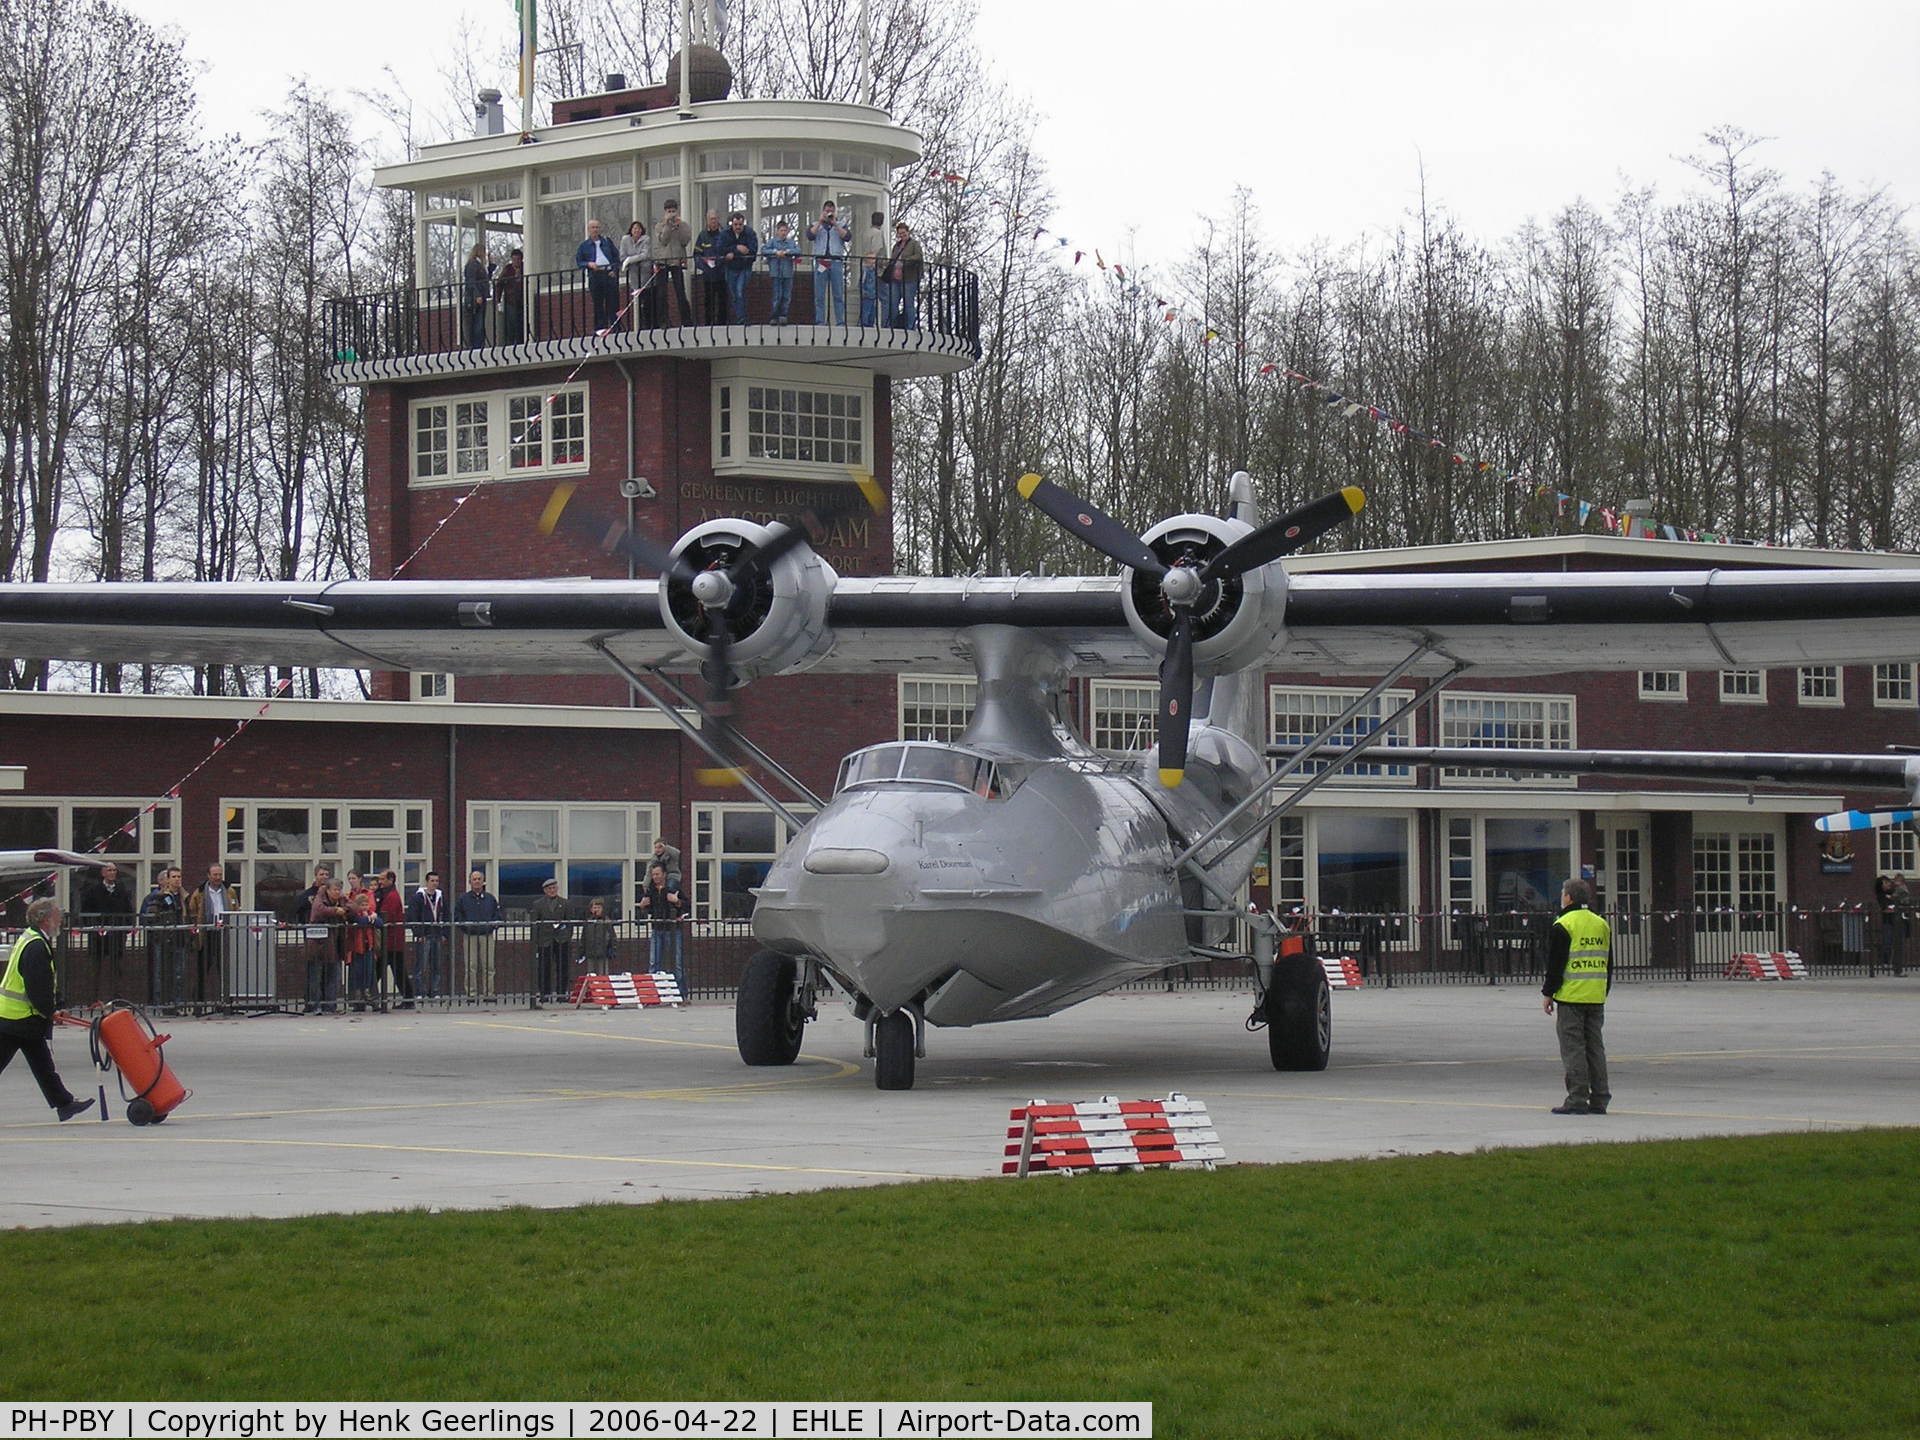 PH-PBY, 1941 Consolidated PBY-5A Catalina C/N 300, Departure from Aviodrome ramp, Lelystad airport